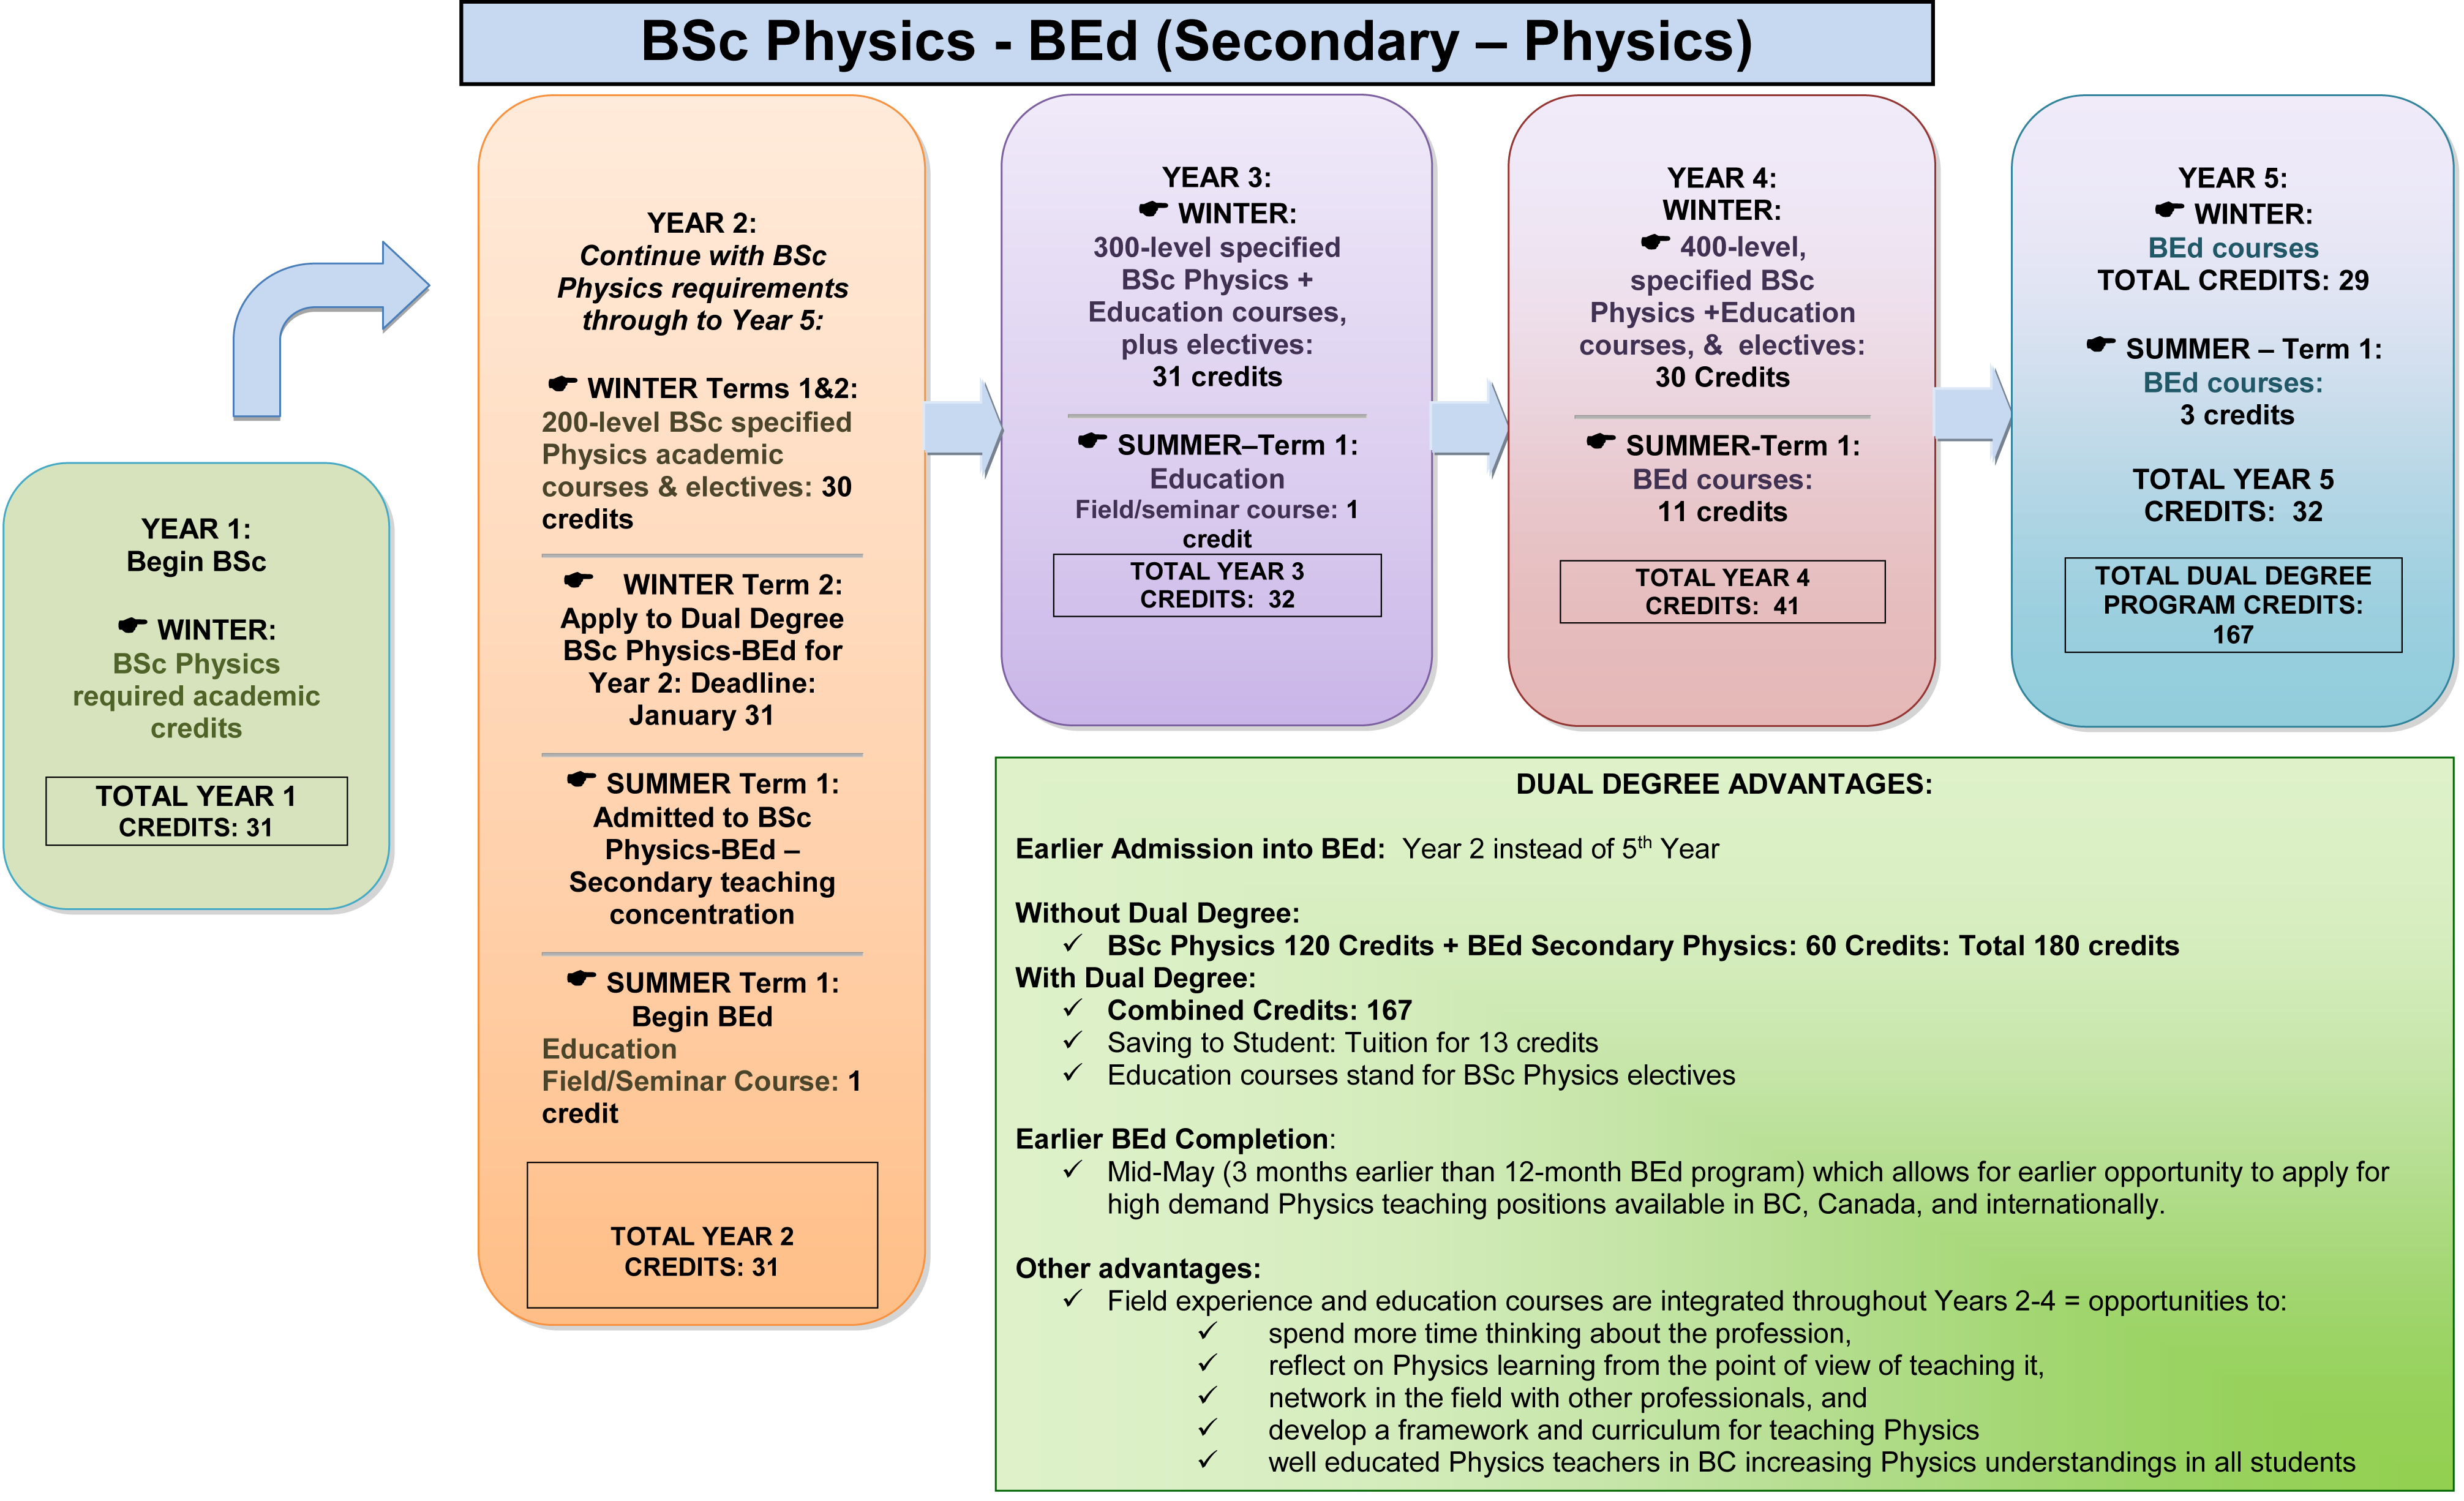 BSc/BEd Dual Degree in Physics and Education